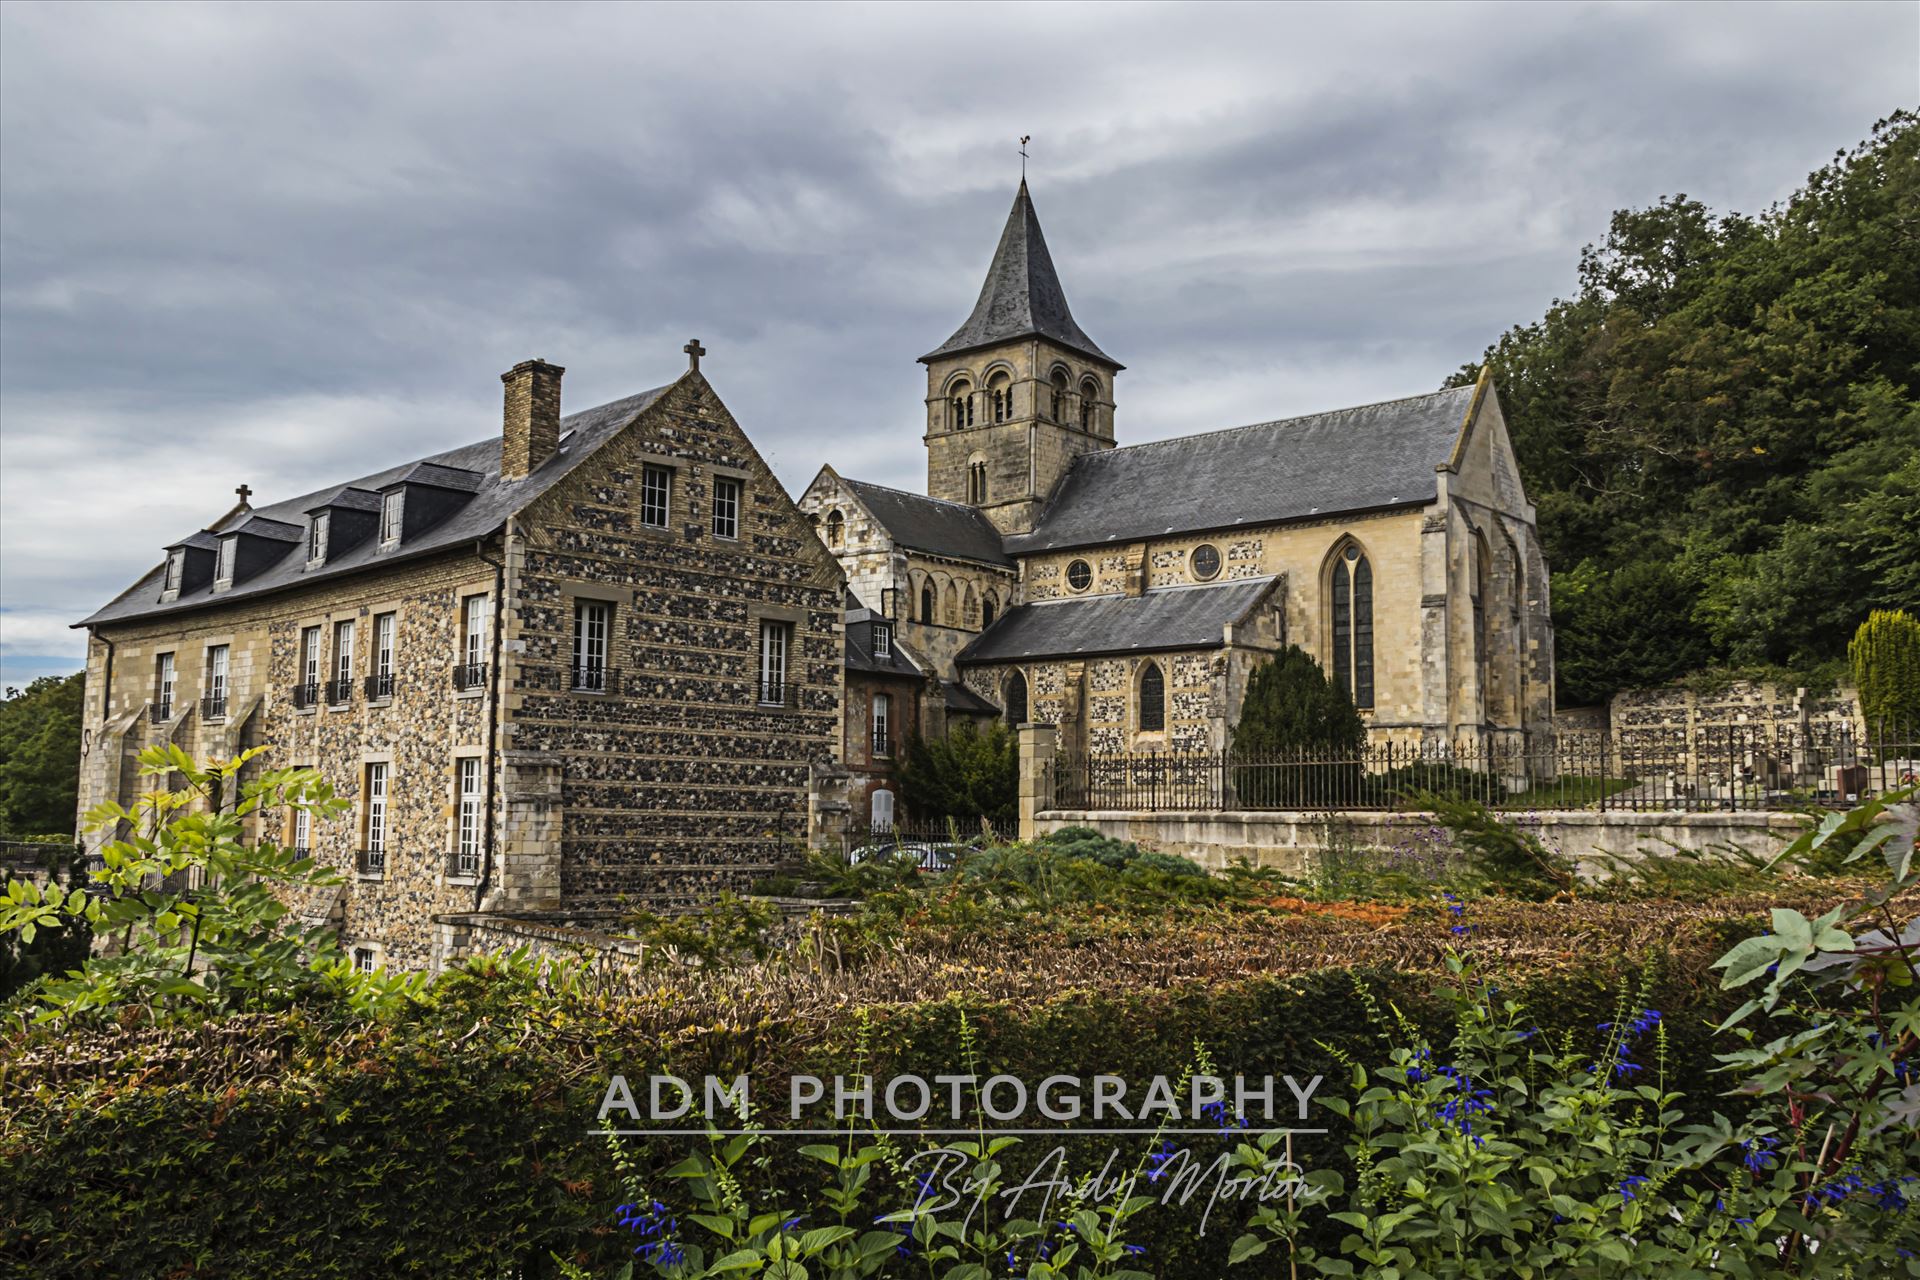 L’Abbaye de Graville L’Abbaye de Graville, Le Havre, France. by Andy Morton Photography